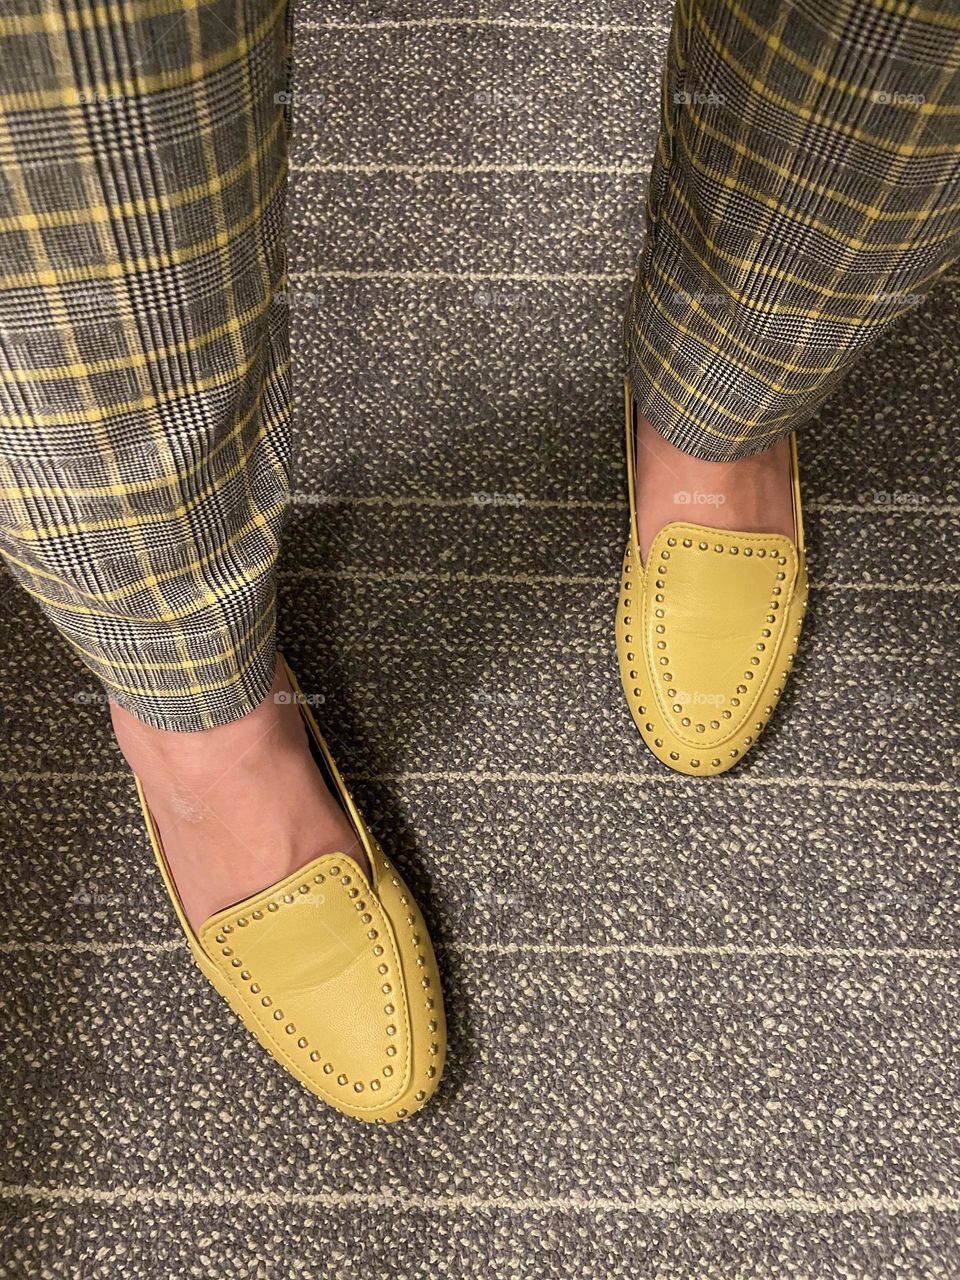 A photo of my gray and yellow plaid pants and my yellow shoes. Yellow is an uplifting color to work into your wardrobe. 